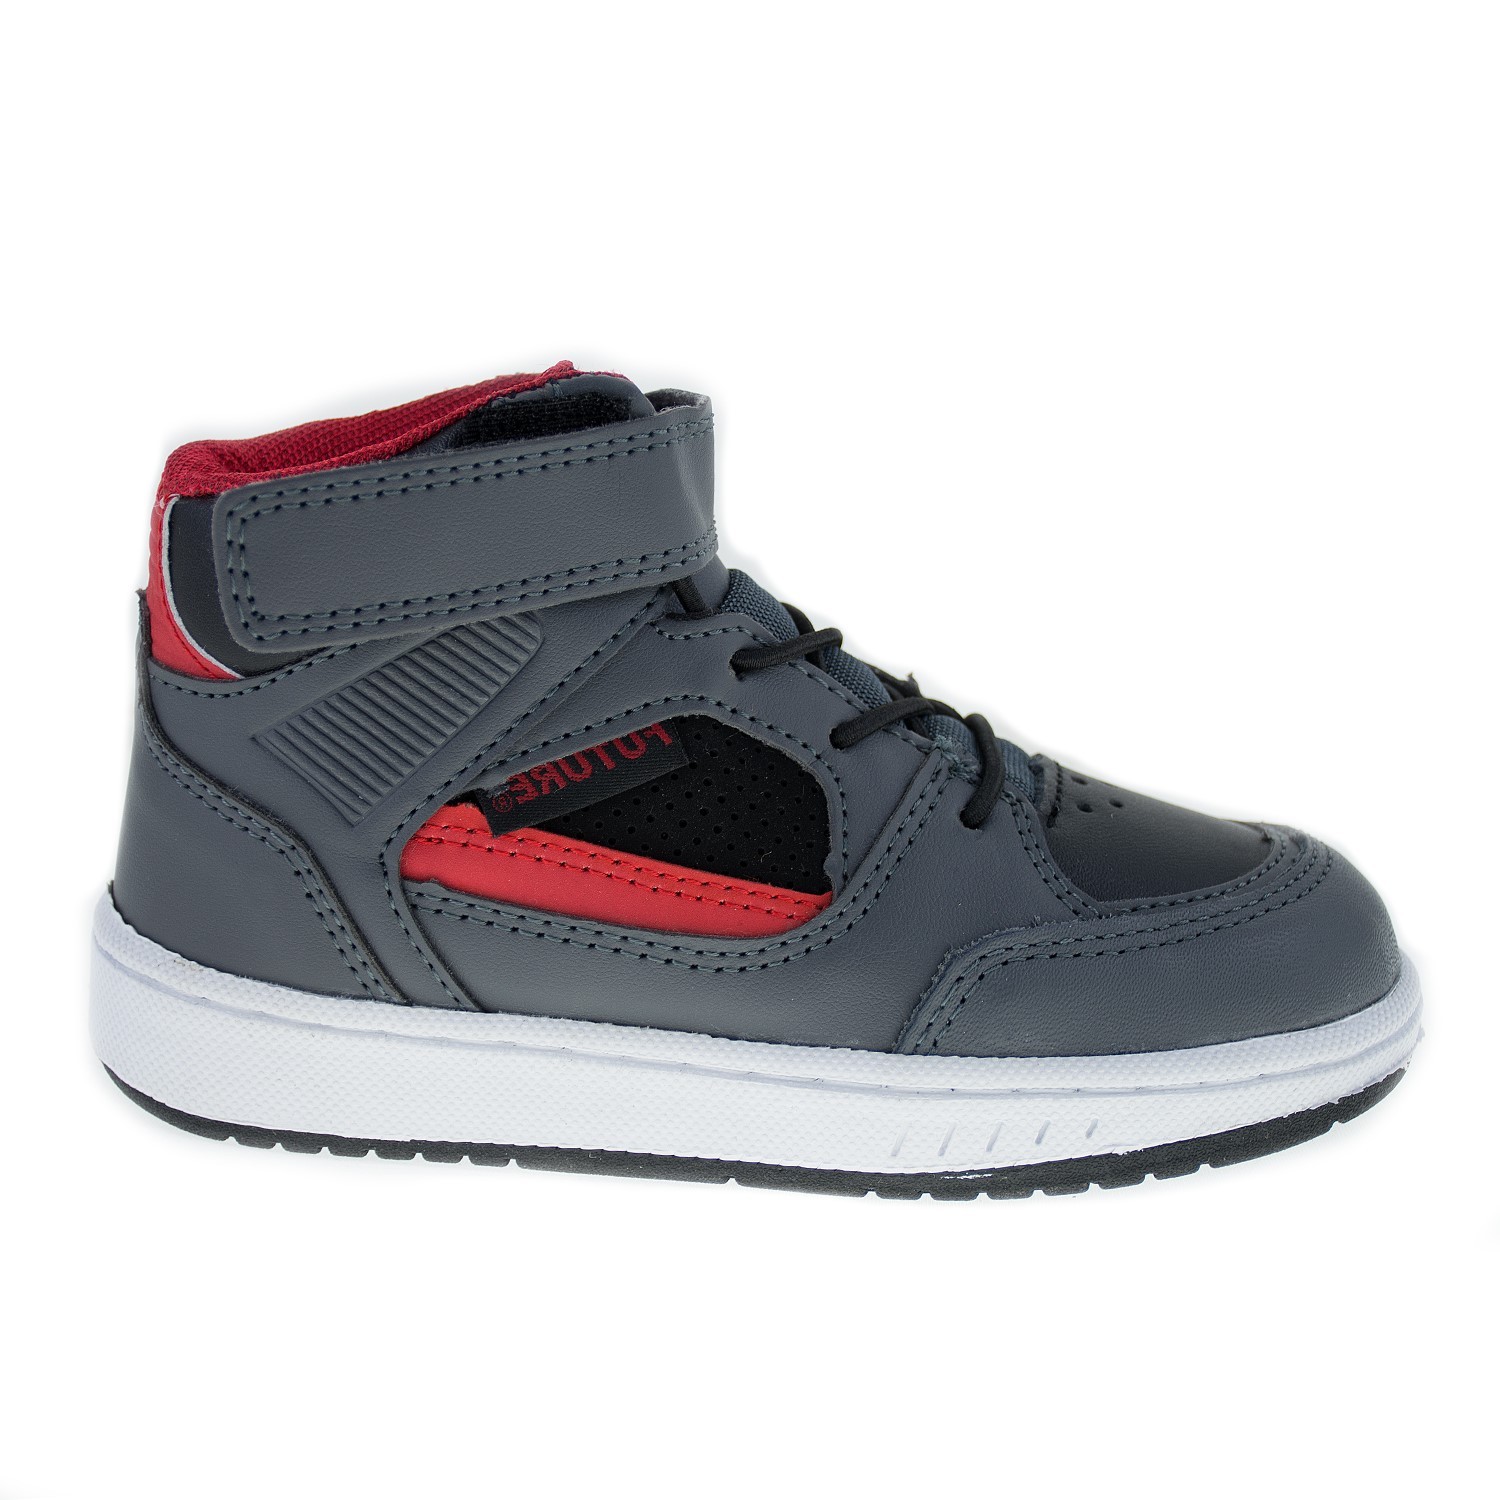 Boy's Future High-Top Gray Toddler/Youth Tennis Shoes - Boys' Shoes